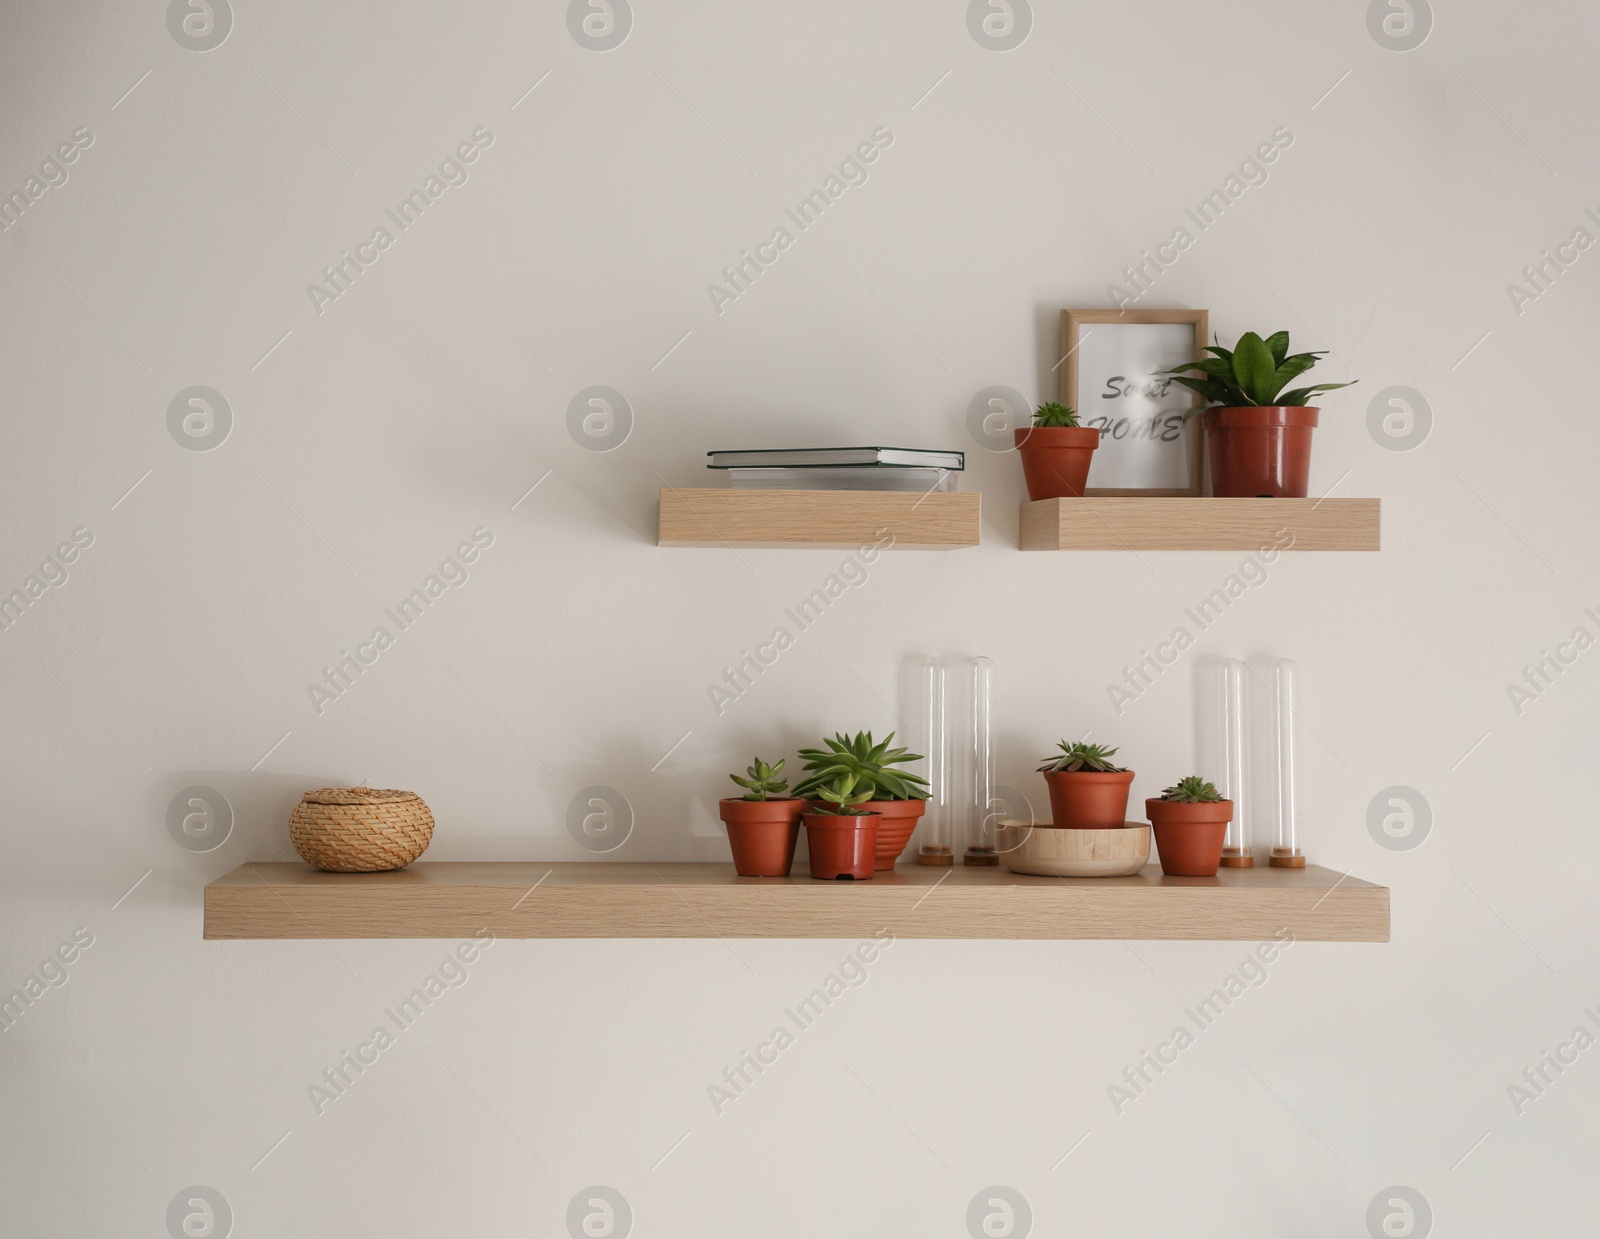 Photo of Wooden shelves with beautiful plants and different decorative elements on light wall